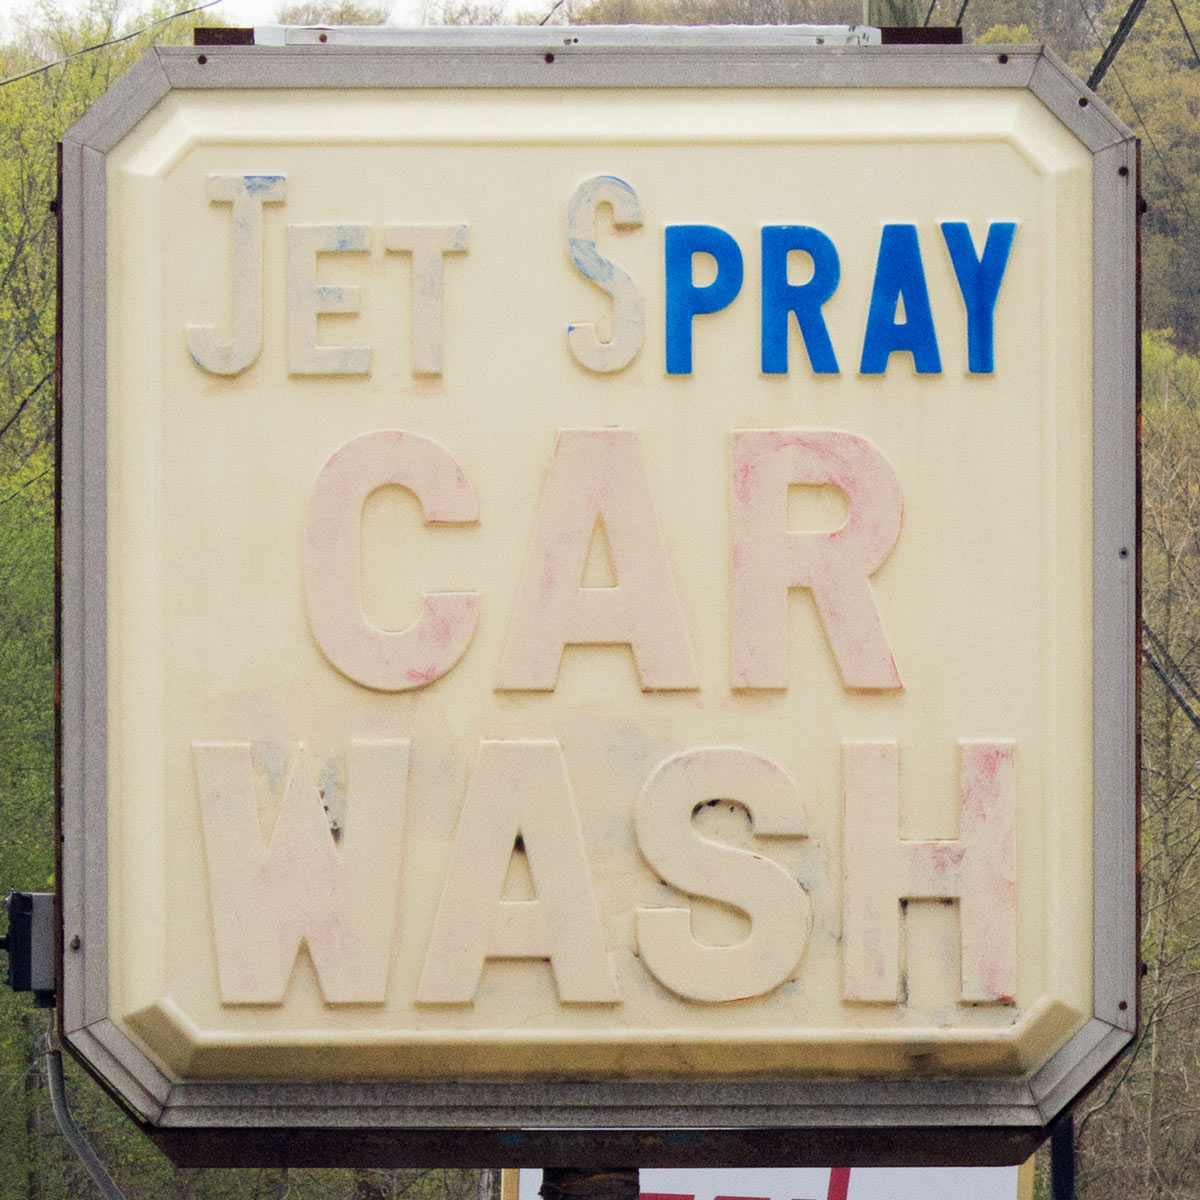 Car wash sign where the words ‘jet spray car wash’ have all faded and someone has painted in certain letters so that the sign now reads ‘pray’